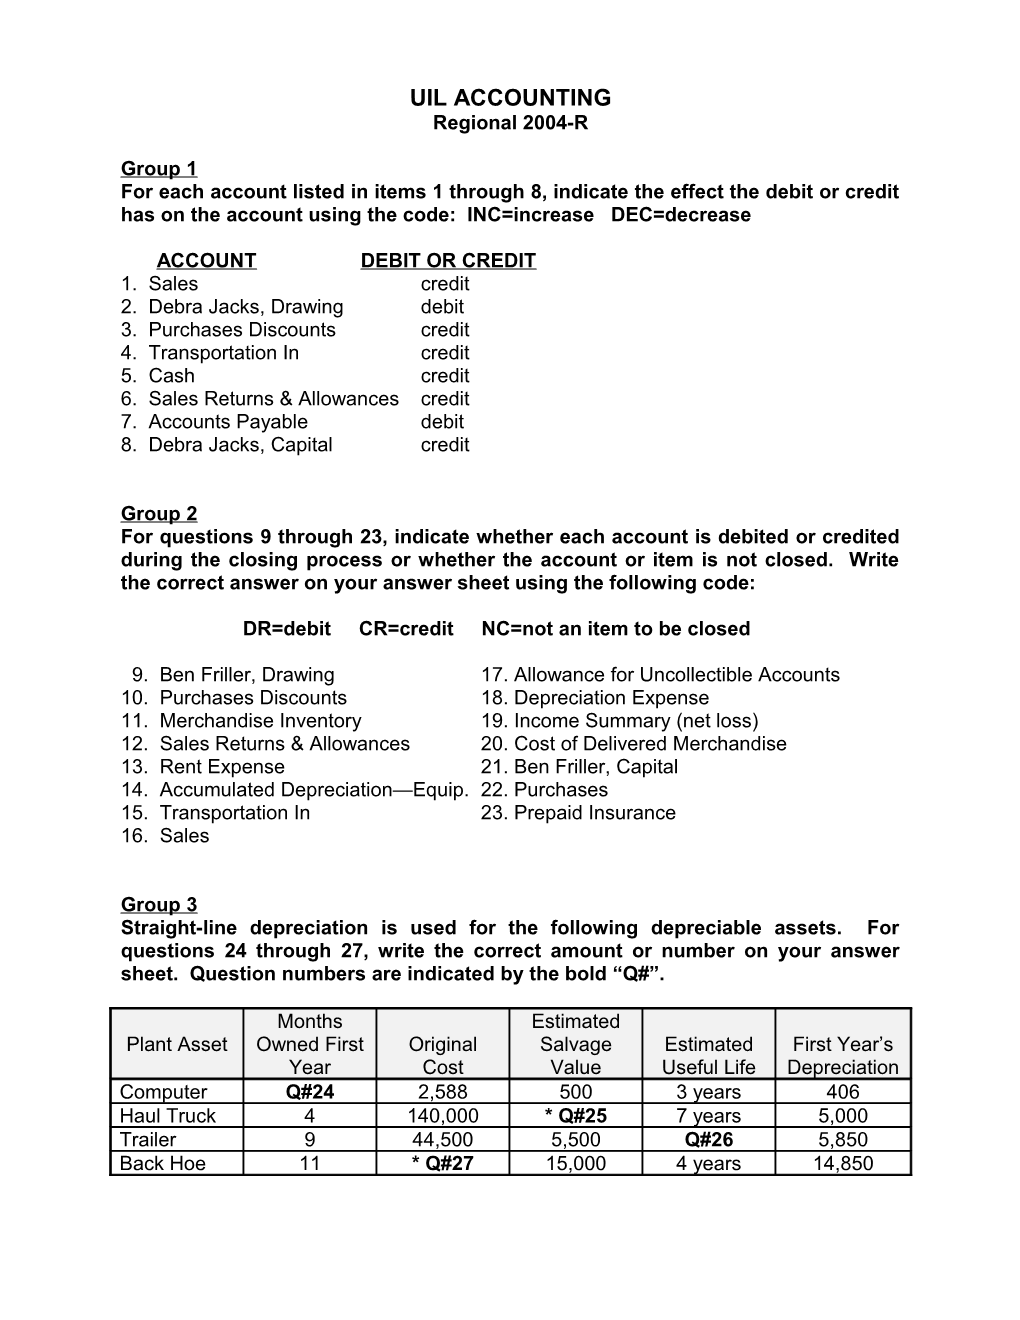 UIL Accounting Regional 2004-Rpage 1